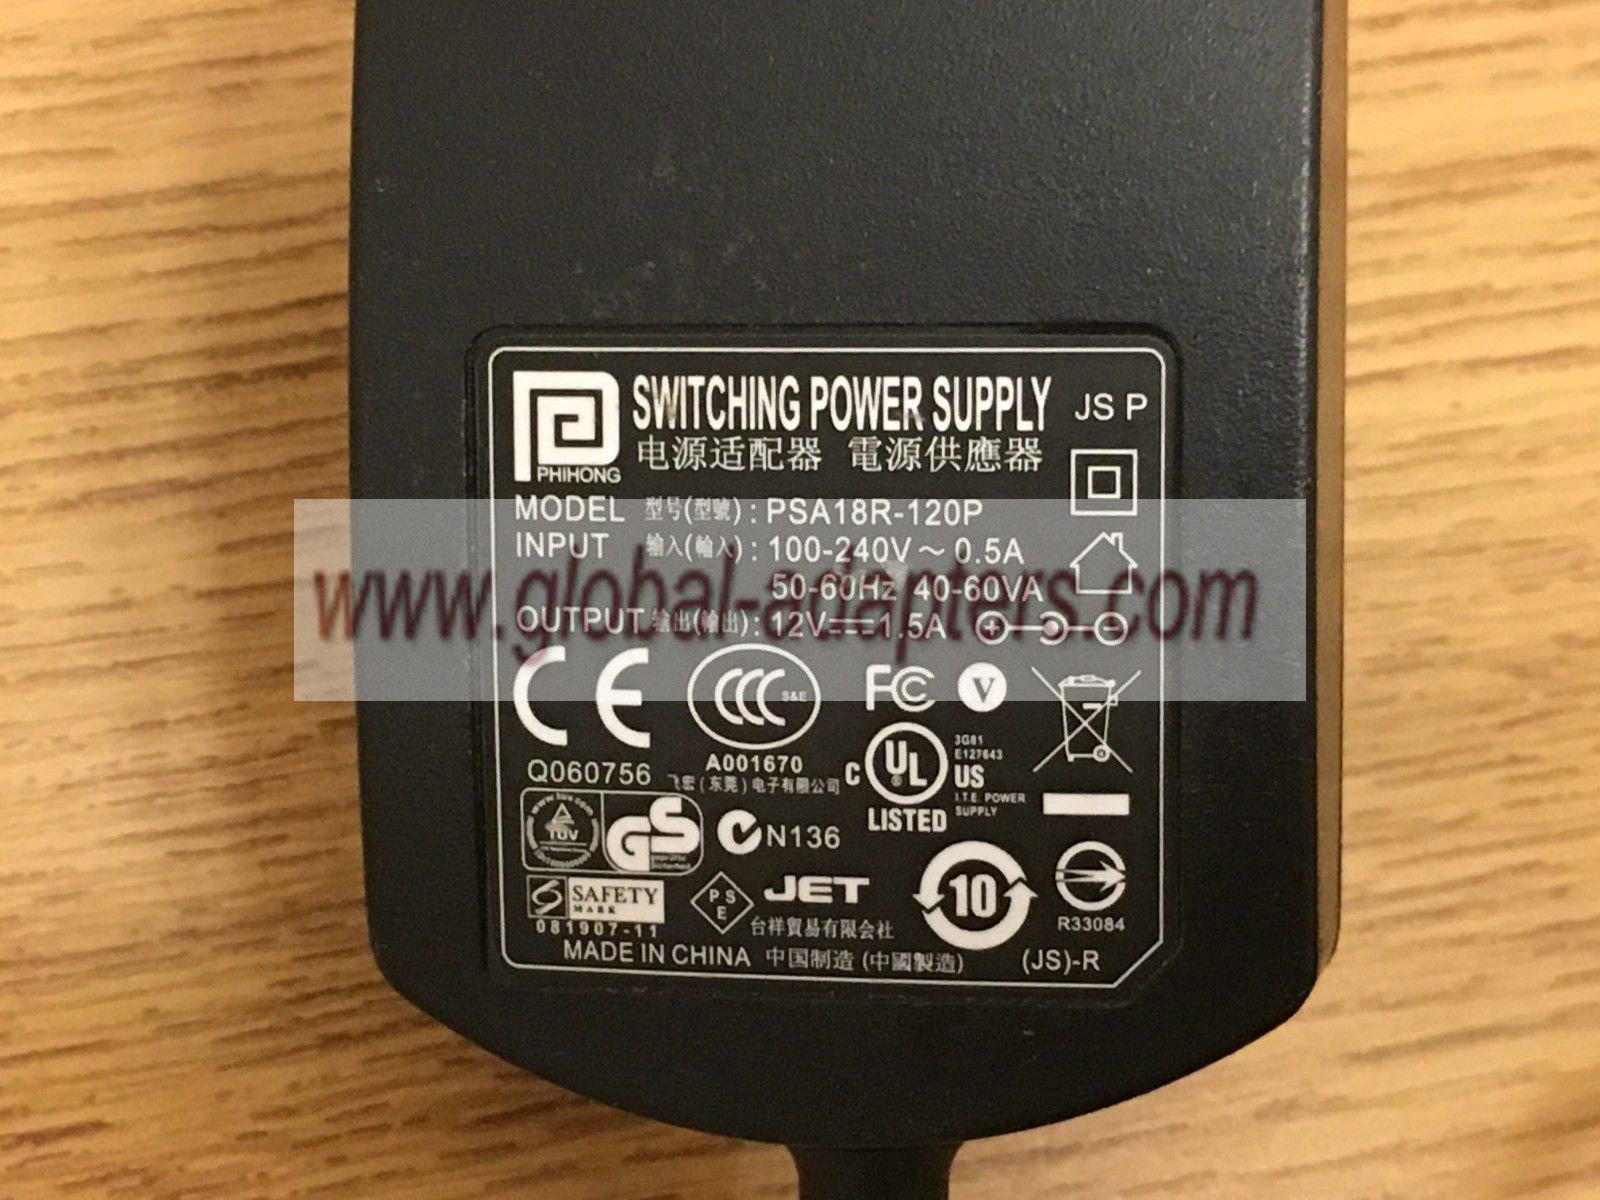 GENUINE 12V 1.5A PHIHONG PSA18R-120P AC/DC SWITCHING POWER SUPPLY ADAPTER - Click Image to Close